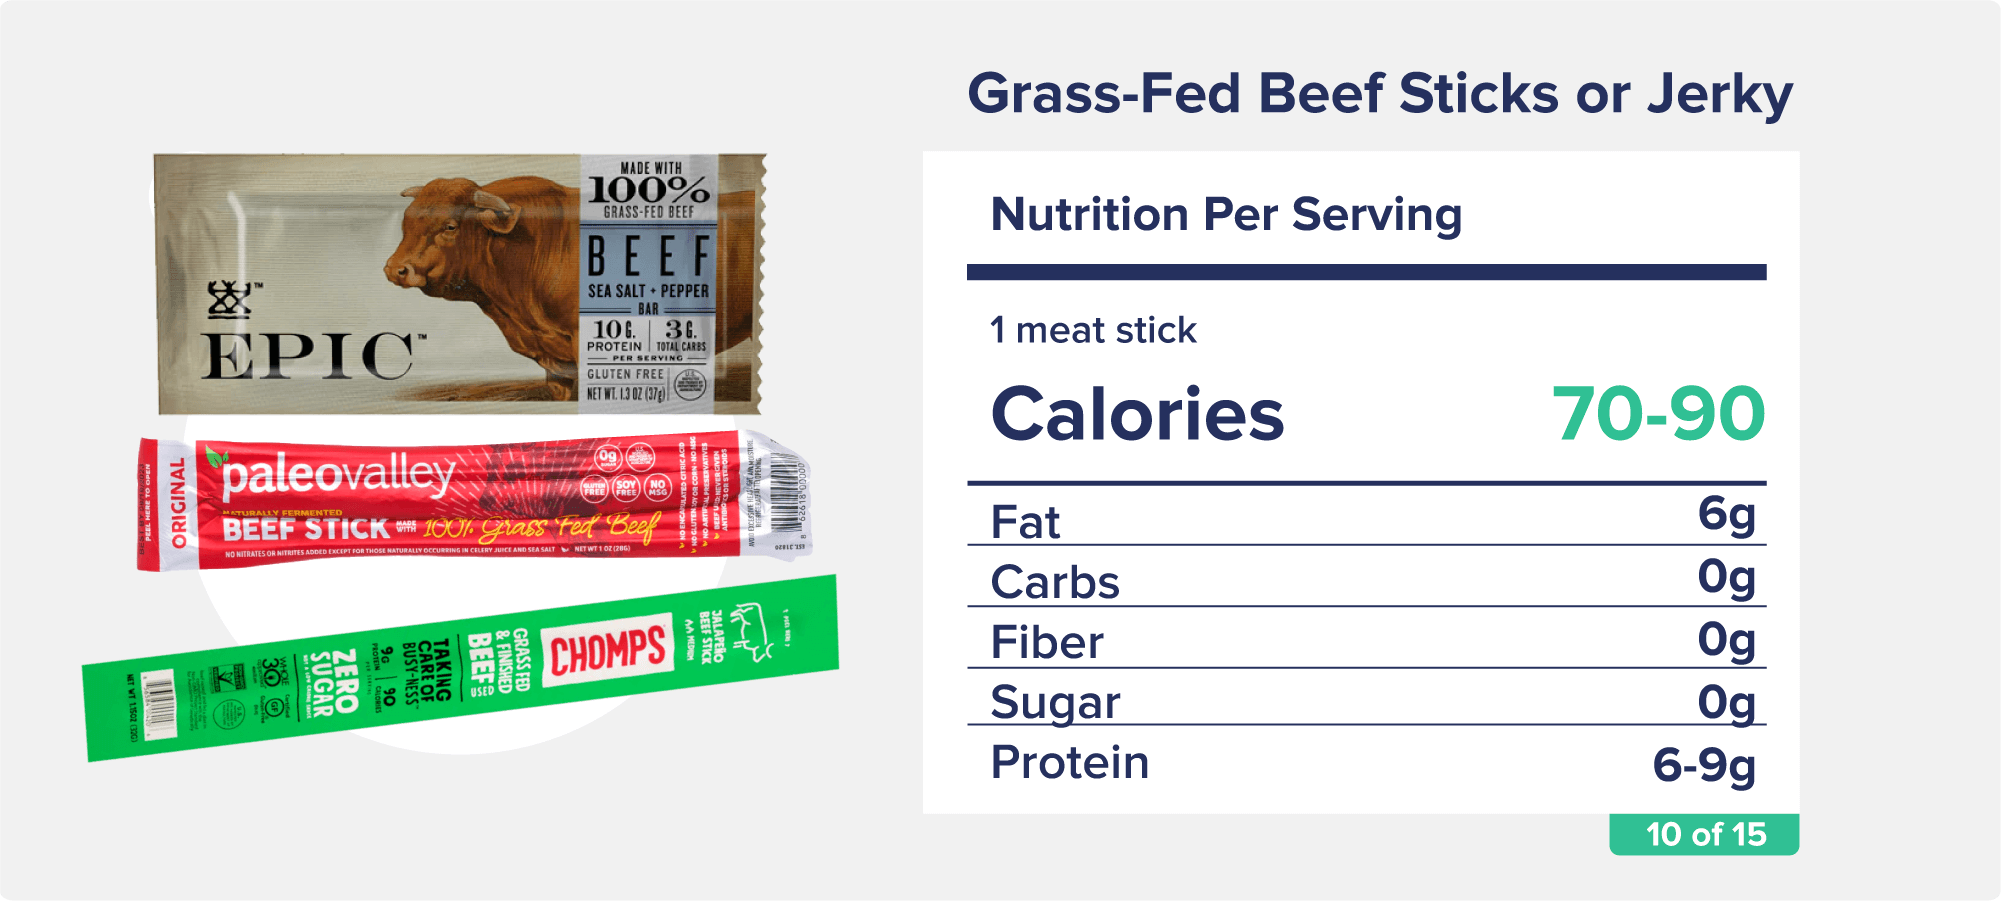 Three packages of beef jerky or sticks from Epic, Paleovalley, and Chomps brands, along with accompanying nutrition facts like calories, fat, and protein.